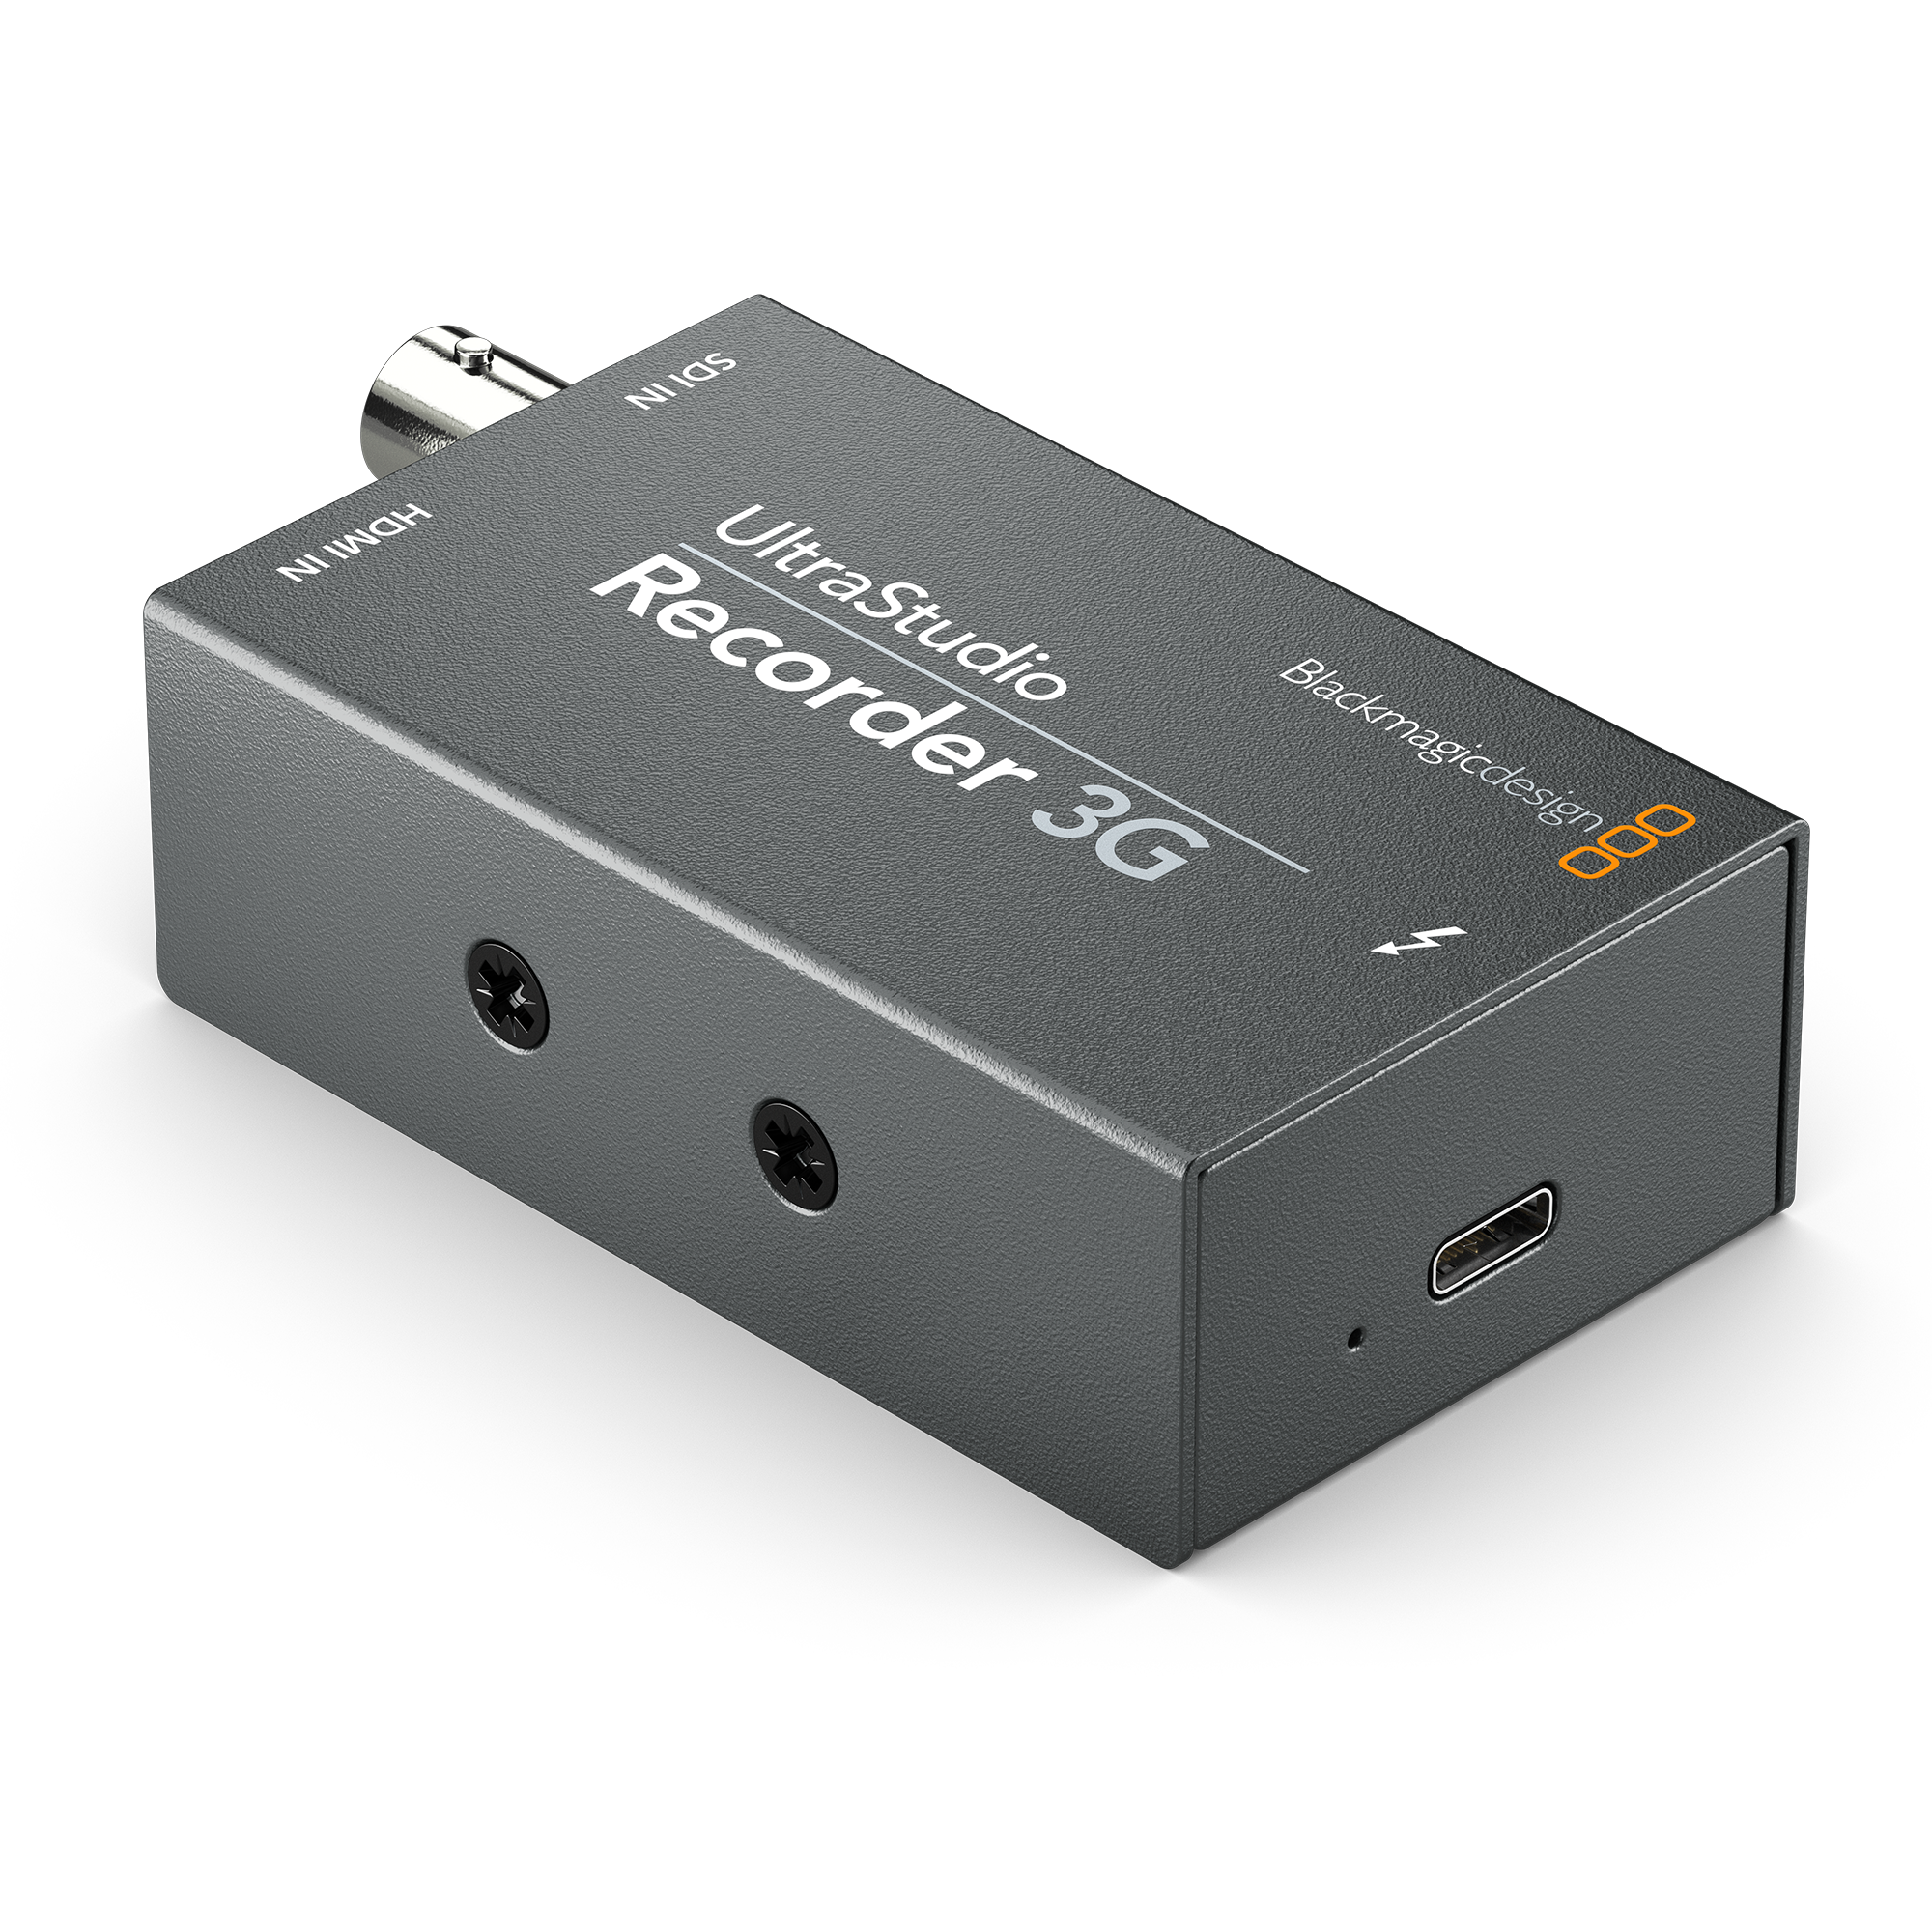 BlackMagic UltraStudio Recorder 3G (Thunderbolt 3 cable not included)